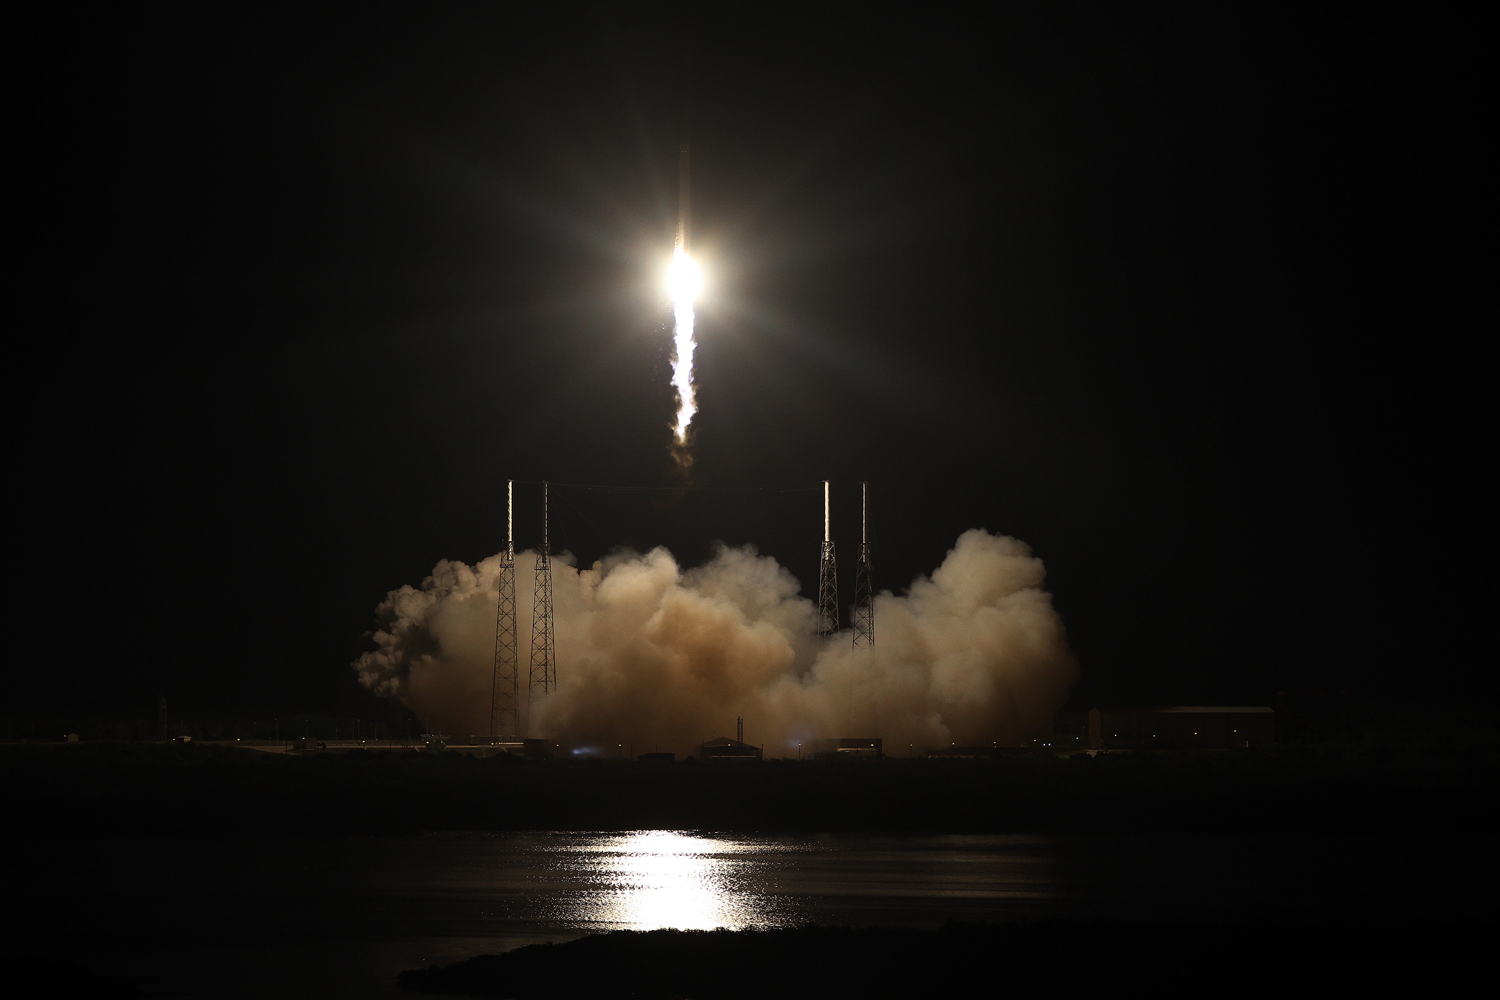 A Falcon 9 rocket carrying the Dragon spacecraft blasts off from Complex 40 at Cape Canaveral Air Force Station, in Cape Canaveral, Fla., on May 22, 2012.